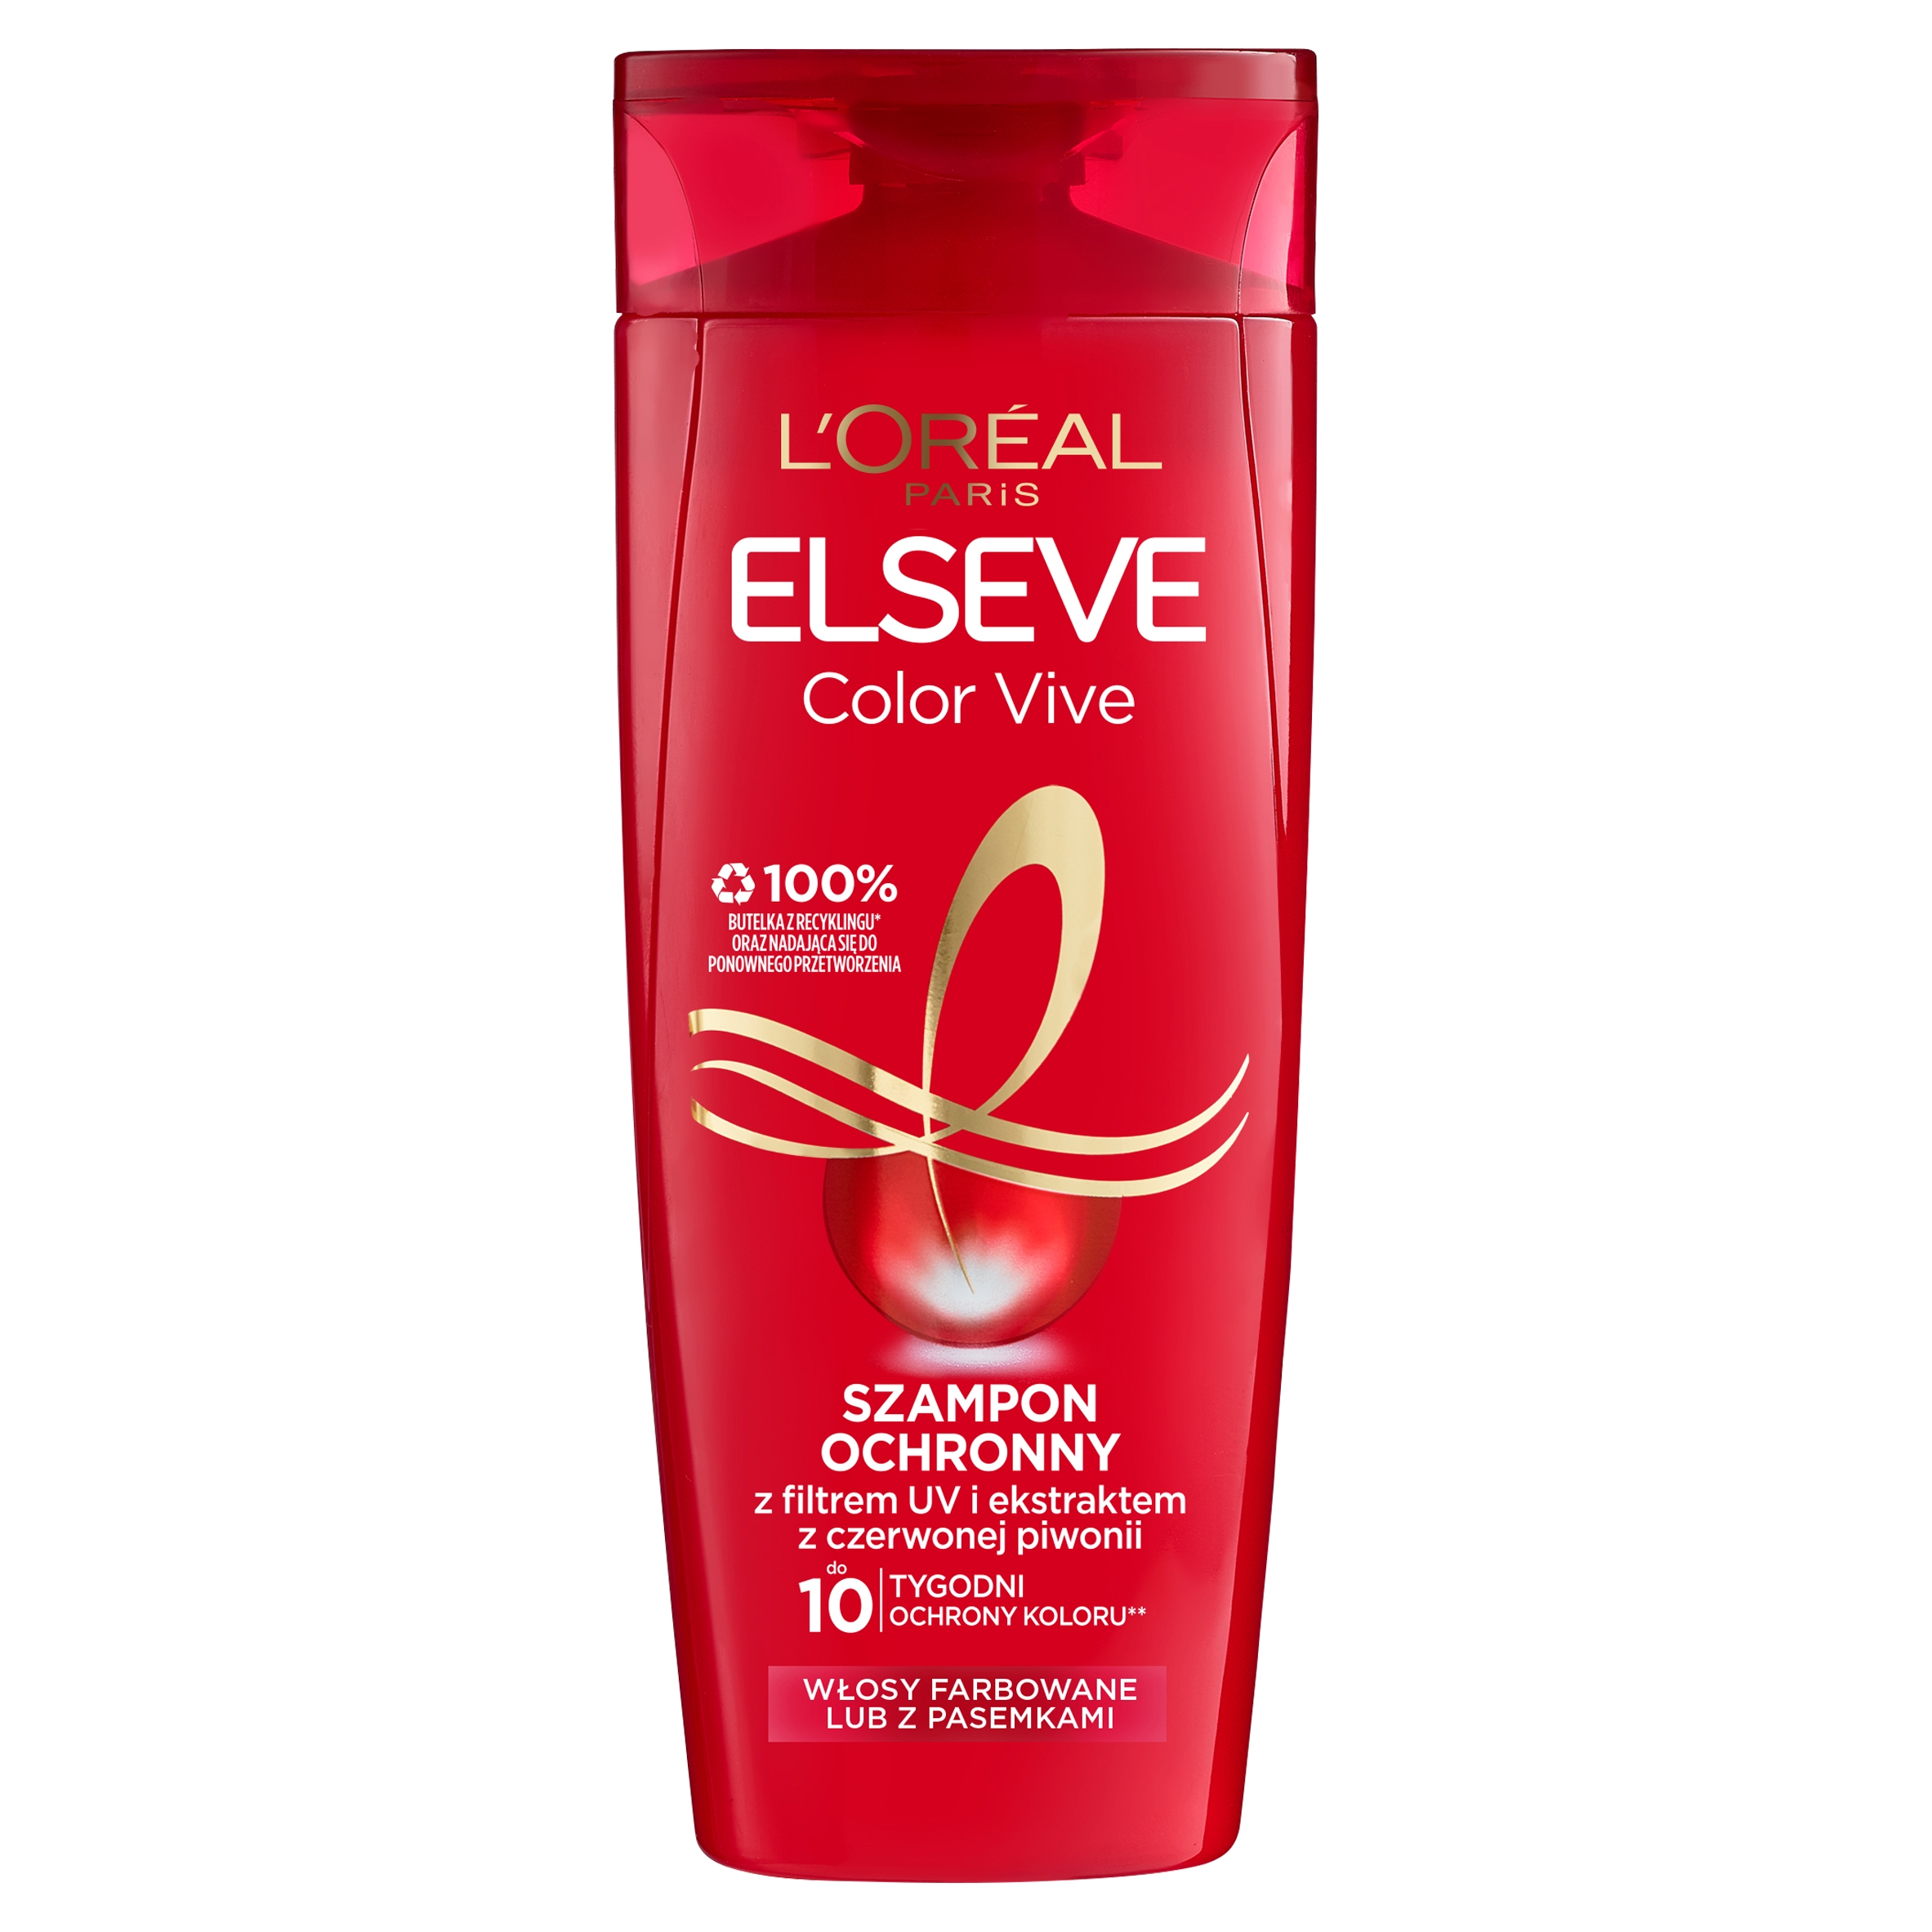 loreal szampon fioletowy color vive